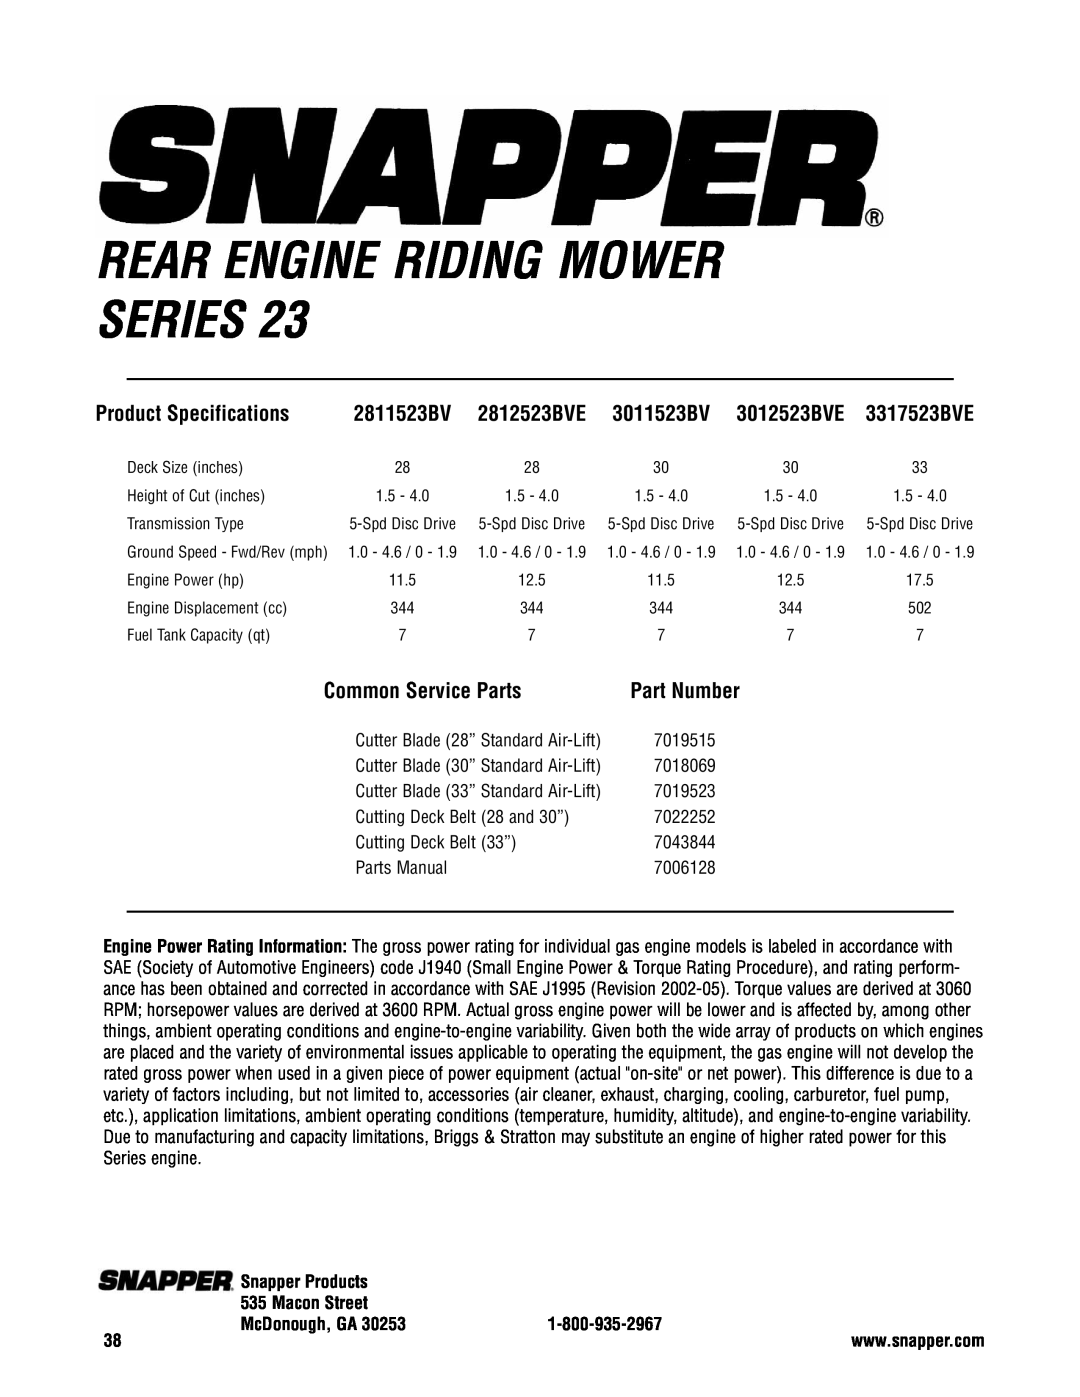 Snapper 3317523BVE Rear Engine Riding Mower Series, Product Specifications, 2811523BV, Common Service Parts, 2812523BVE 